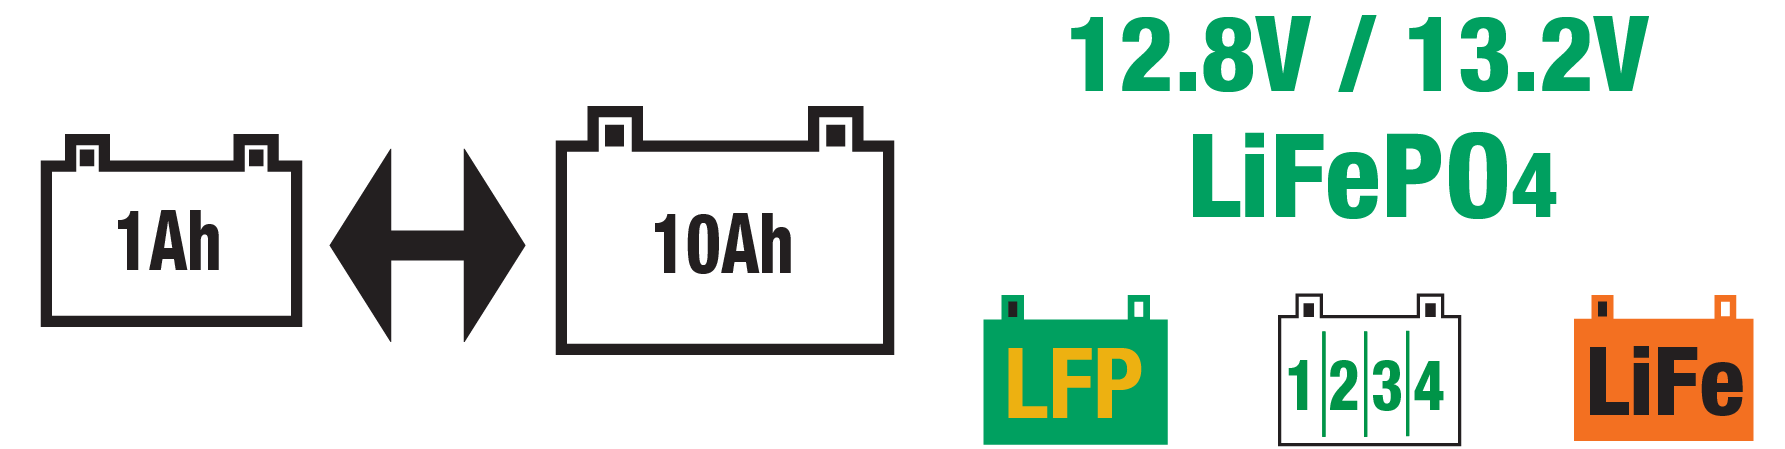 The Lithium 4 Bank is ideal for 12.8V/13.2V LiFePO4 or LFP batteries. 